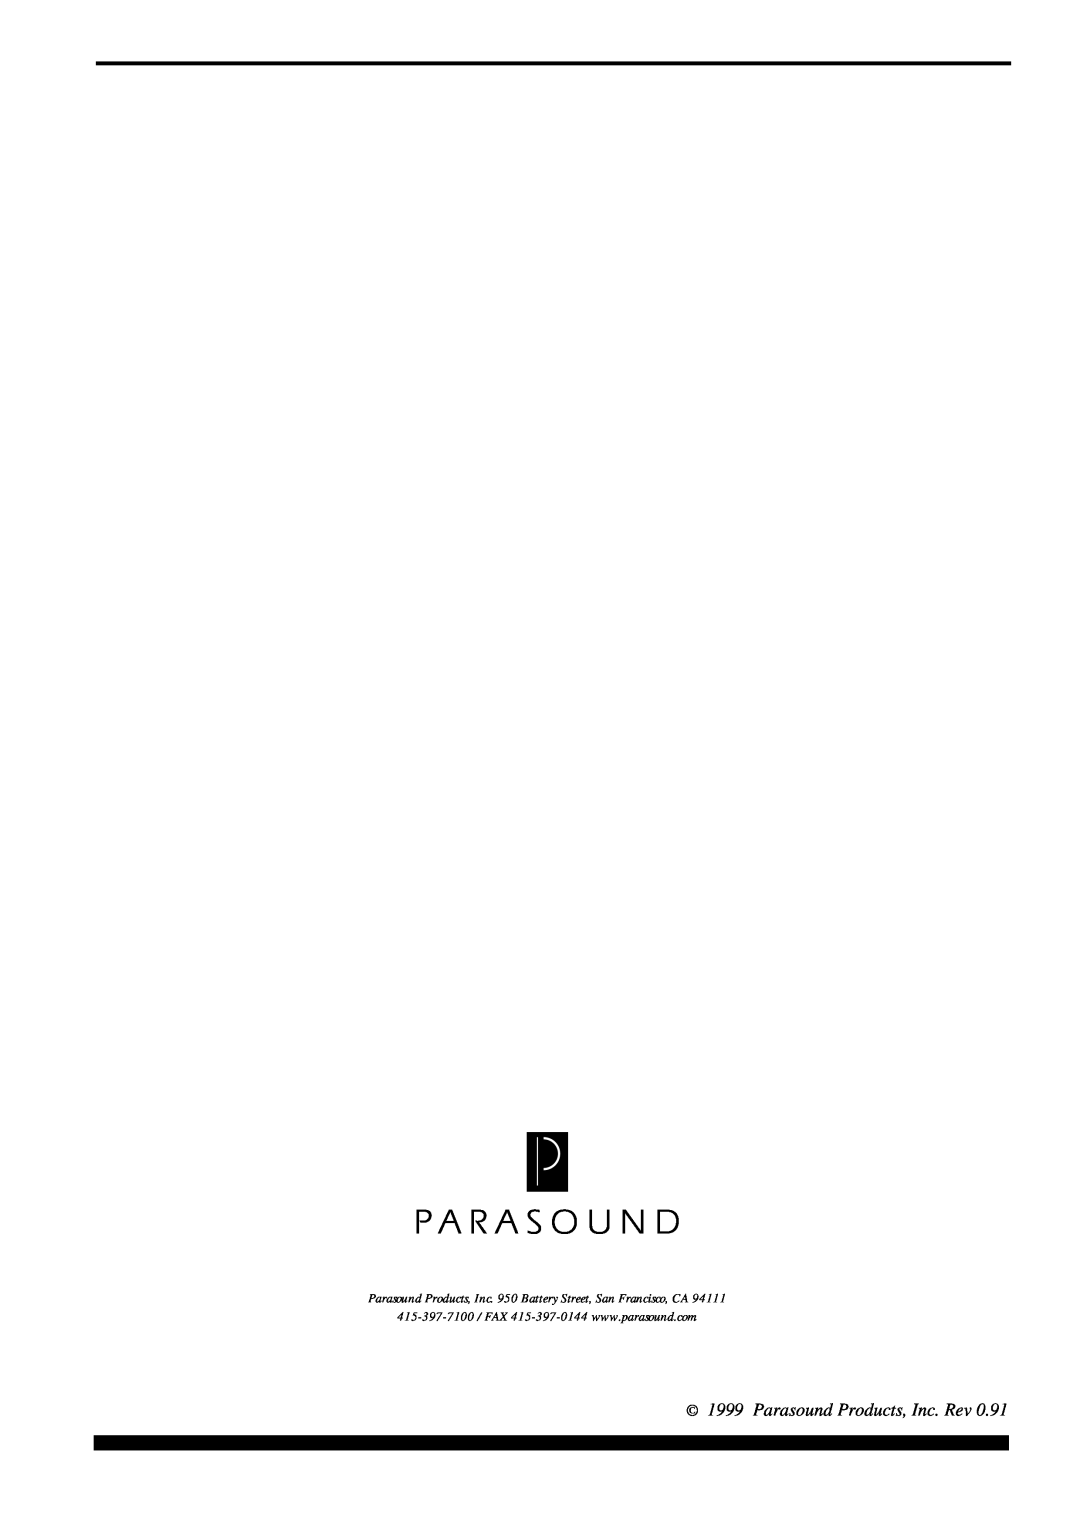 Parasound AVC-2500 owner manual Parasound Products, Inc. Rev 